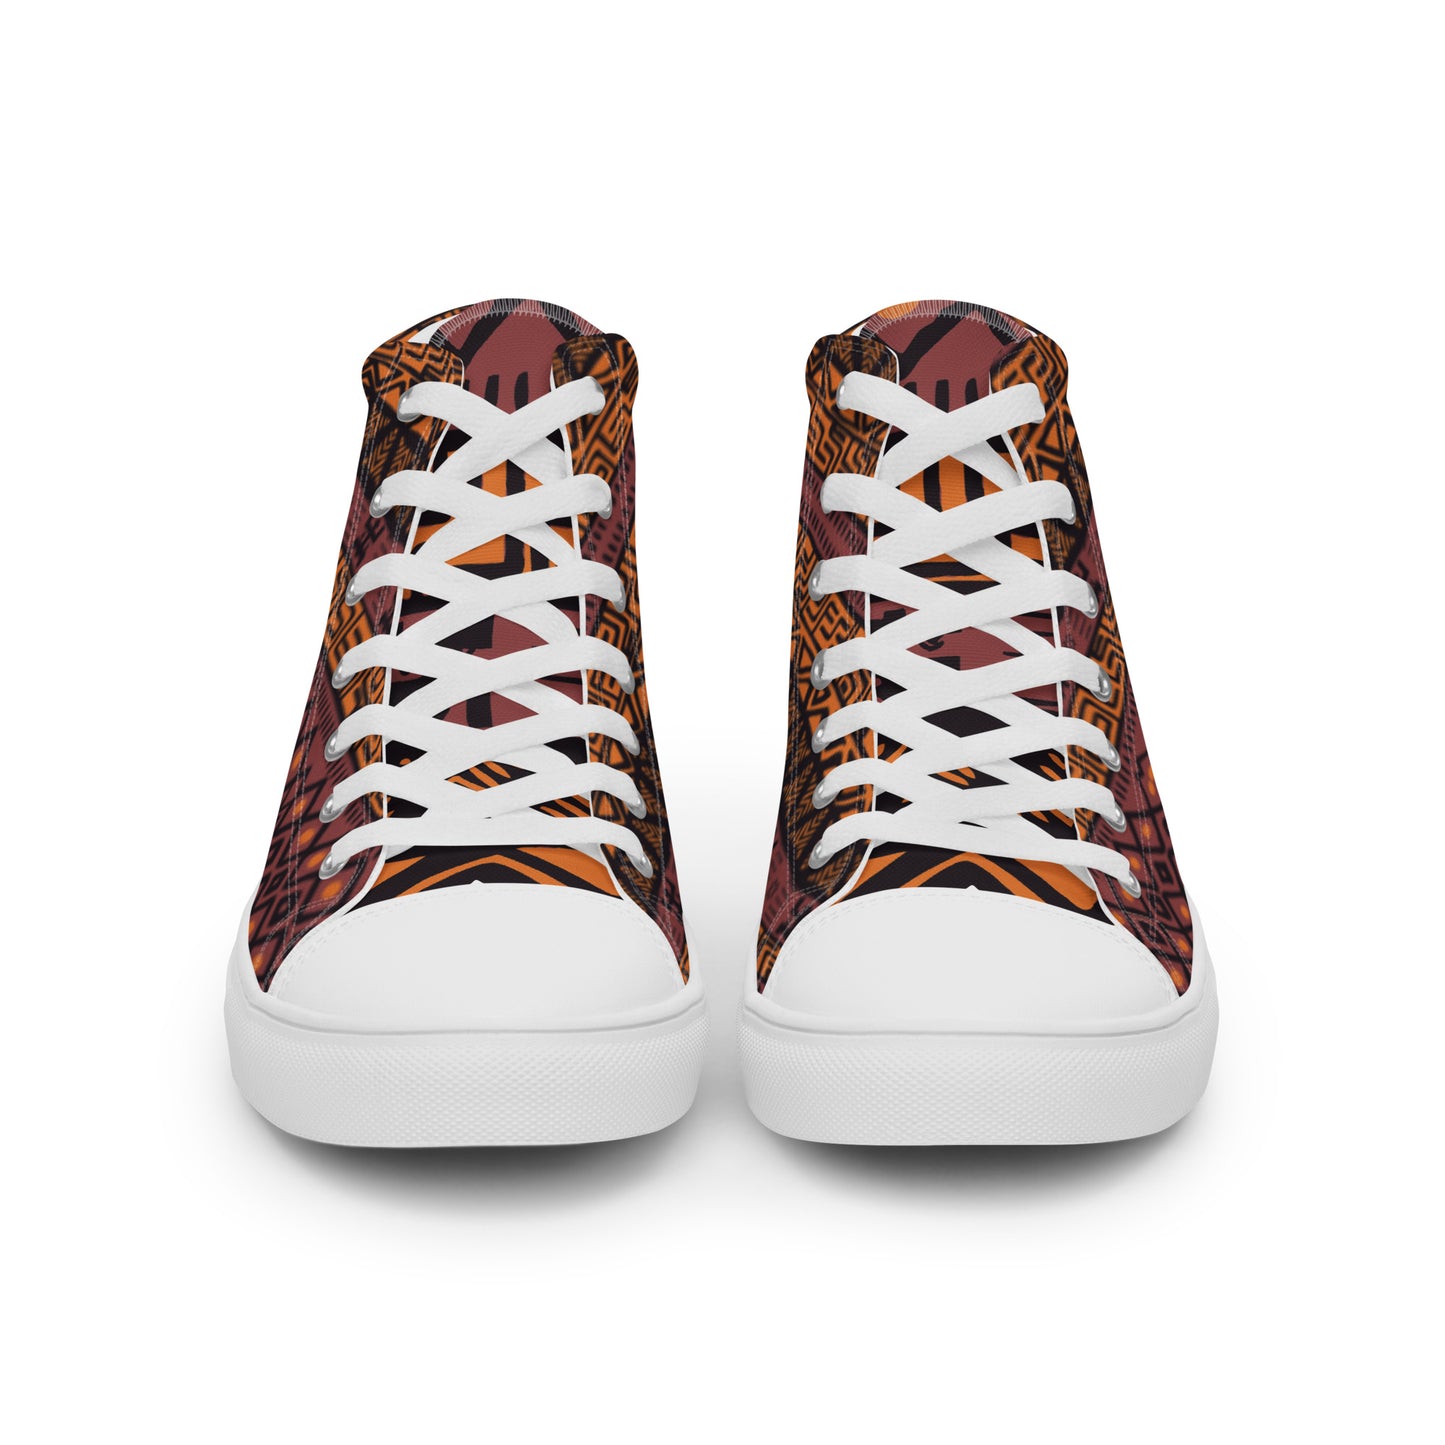 AZONTO Women’s high top canvas shoes